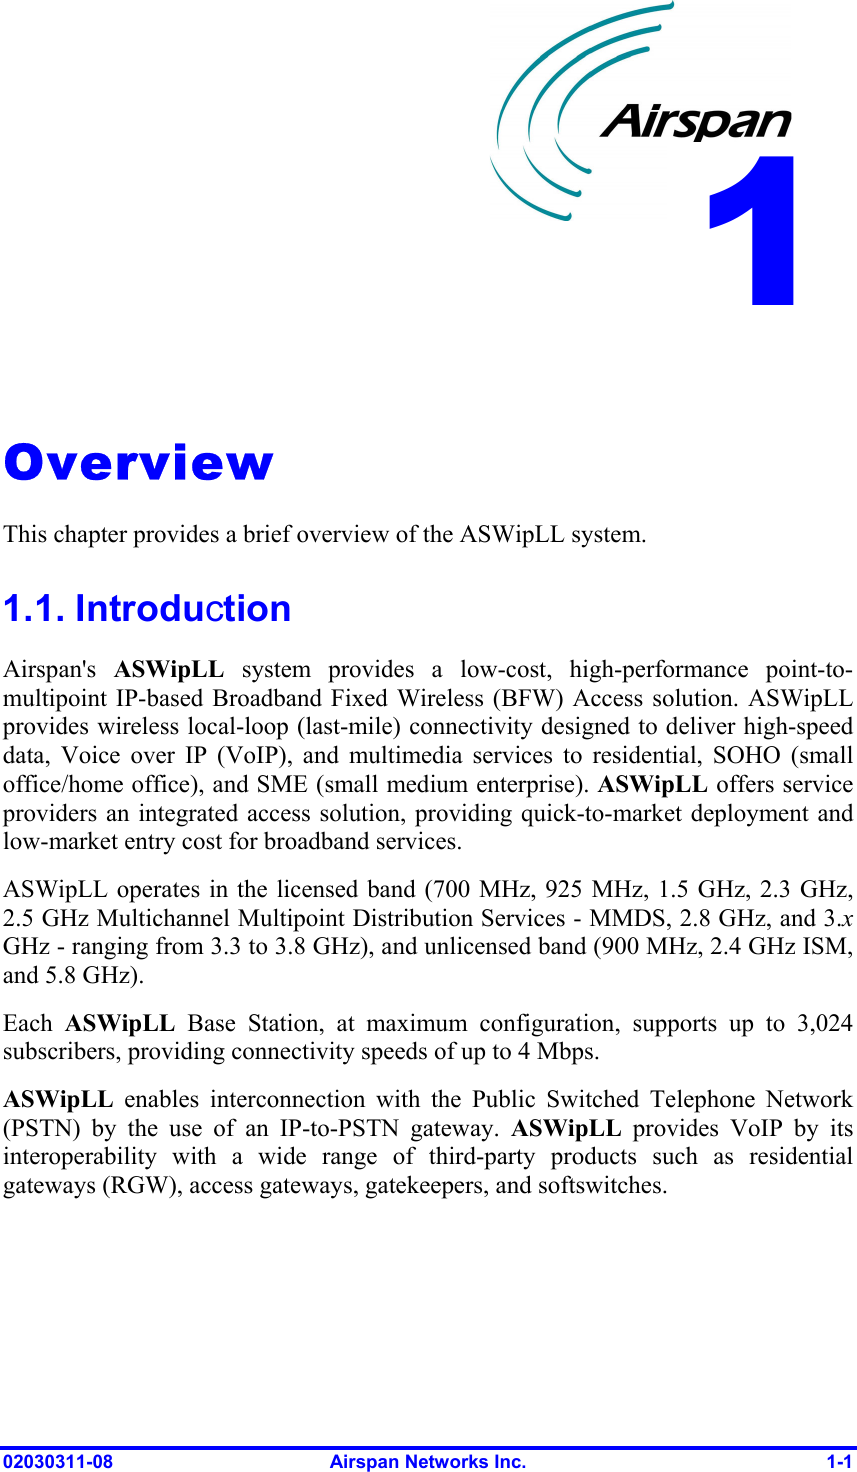  02030311-08  Airspan Networks Inc.  1-1   Overview This chapter provides a brief overview of the ASWipLL system. 1.1. Introduction Airspan&apos;s  ASWipLL system provides a low-cost, high-performance point-to-multipoint IP-based Broadband Fixed Wireless (BFW) Access solution. ASWipLL provides wireless local-loop (last-mile) connectivity designed to deliver high-speed data, Voice over IP (VoIP), and multimedia services to residential, SOHO (small office/home office), and SME (small medium enterprise). ASWipLL offers service providers an integrated access solution, providing quick-to-market deployment and low-market entry cost for broadband services. ASWipLL operates in the licensed band (700 MHz, 925 MHz, 1.5 GHz, 2.3 GHz, 2.5 GHz Multichannel Multipoint Distribution Services - MMDS, 2.8 GHz, and 3.x GHz - ranging from 3.3 to 3.8 GHz), and unlicensed band (900 MHz, 2.4 GHz ISM, and 5.8 GHz).  Each  ASWipLL Base Station, at maximum configuration, supports up to 3,024 subscribers, providing connectivity speeds of up to 4 Mbps. ASWipLL enables interconnection with the Public Switched Telephone Network (PSTN) by the use of an IP-to-PSTN gateway. ASWipLL provides VoIP by its interoperability with a wide range of third-party products such as residential gateways (RGW), access gateways, gatekeepers, and softswitches. 1 